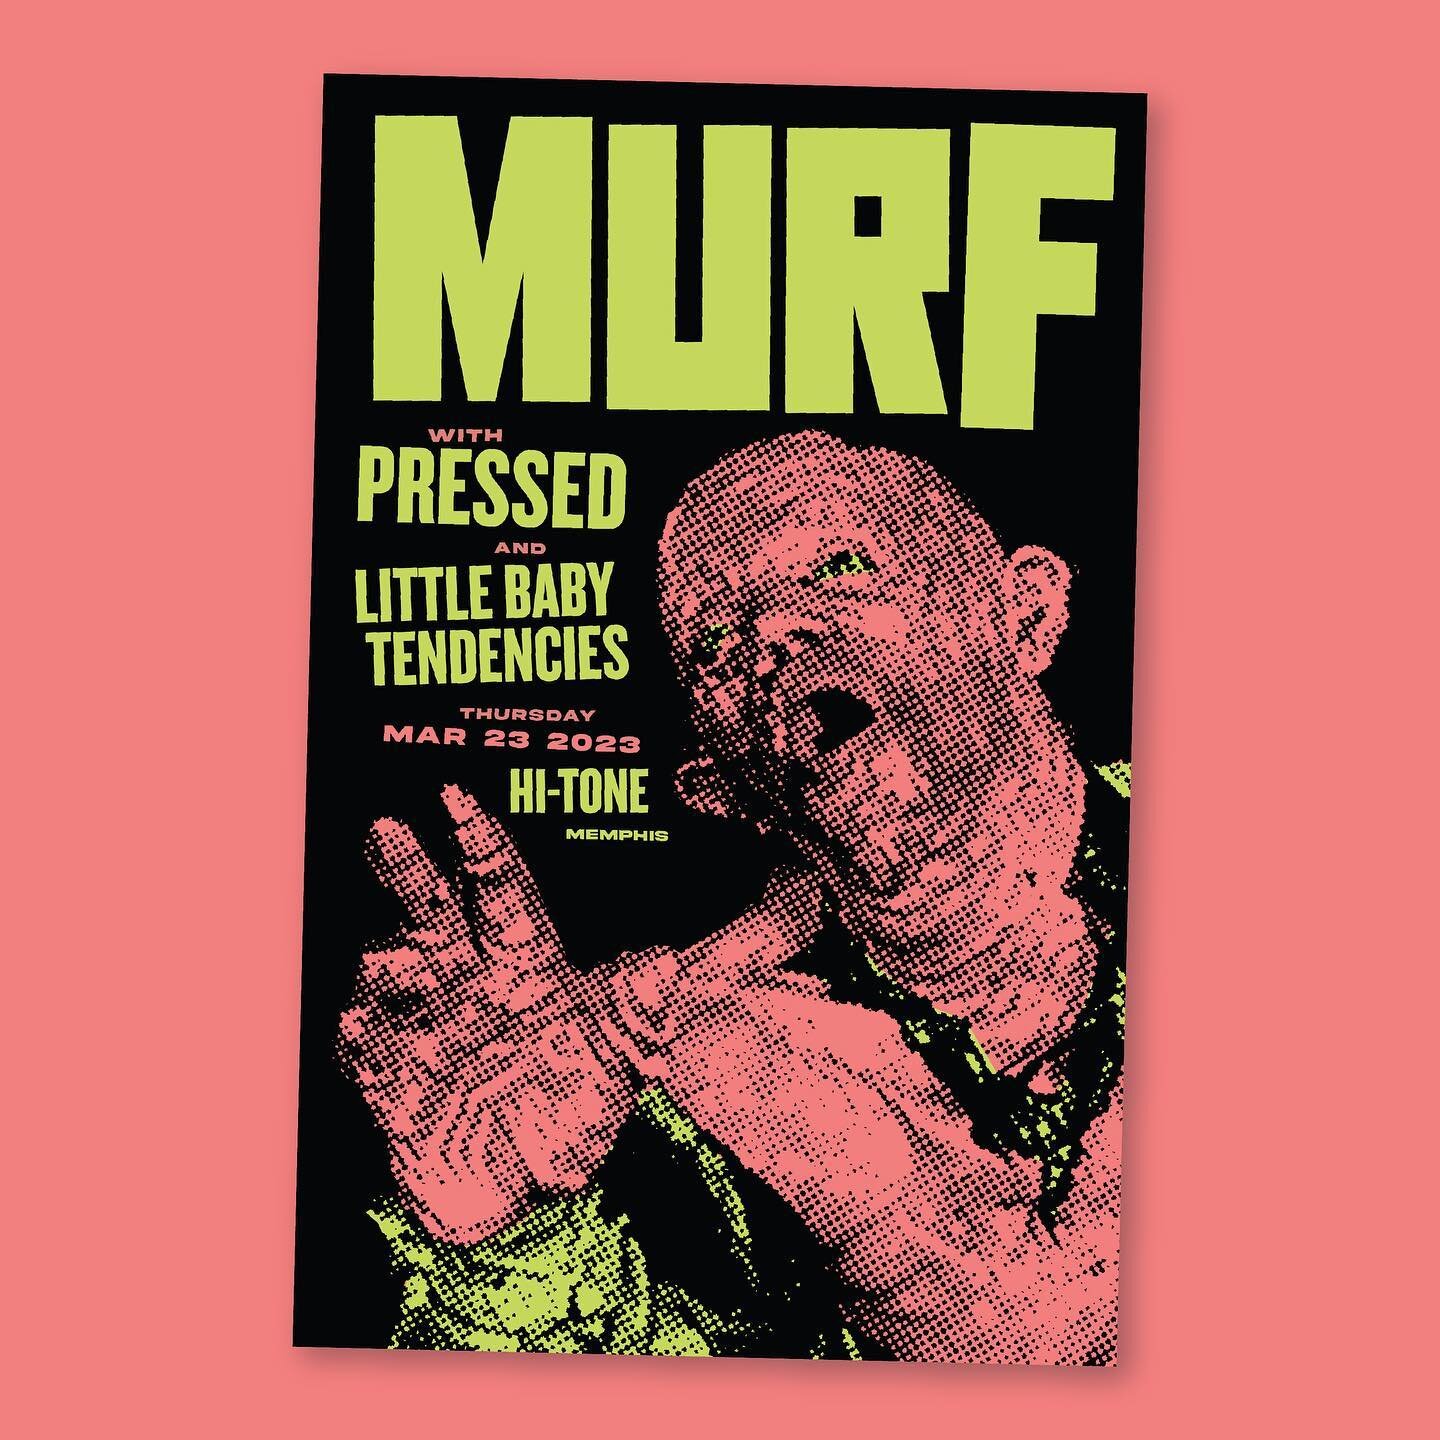 poster for MURF with PRESSED and Little Baby Tendencies at the Hi-Tone! 🦠

with a band name like this, I had to go with this molten fleshy moment from Robocop 🫠 come out Thursday for a weird loud good time!! 

#holtermonster #murf #posters